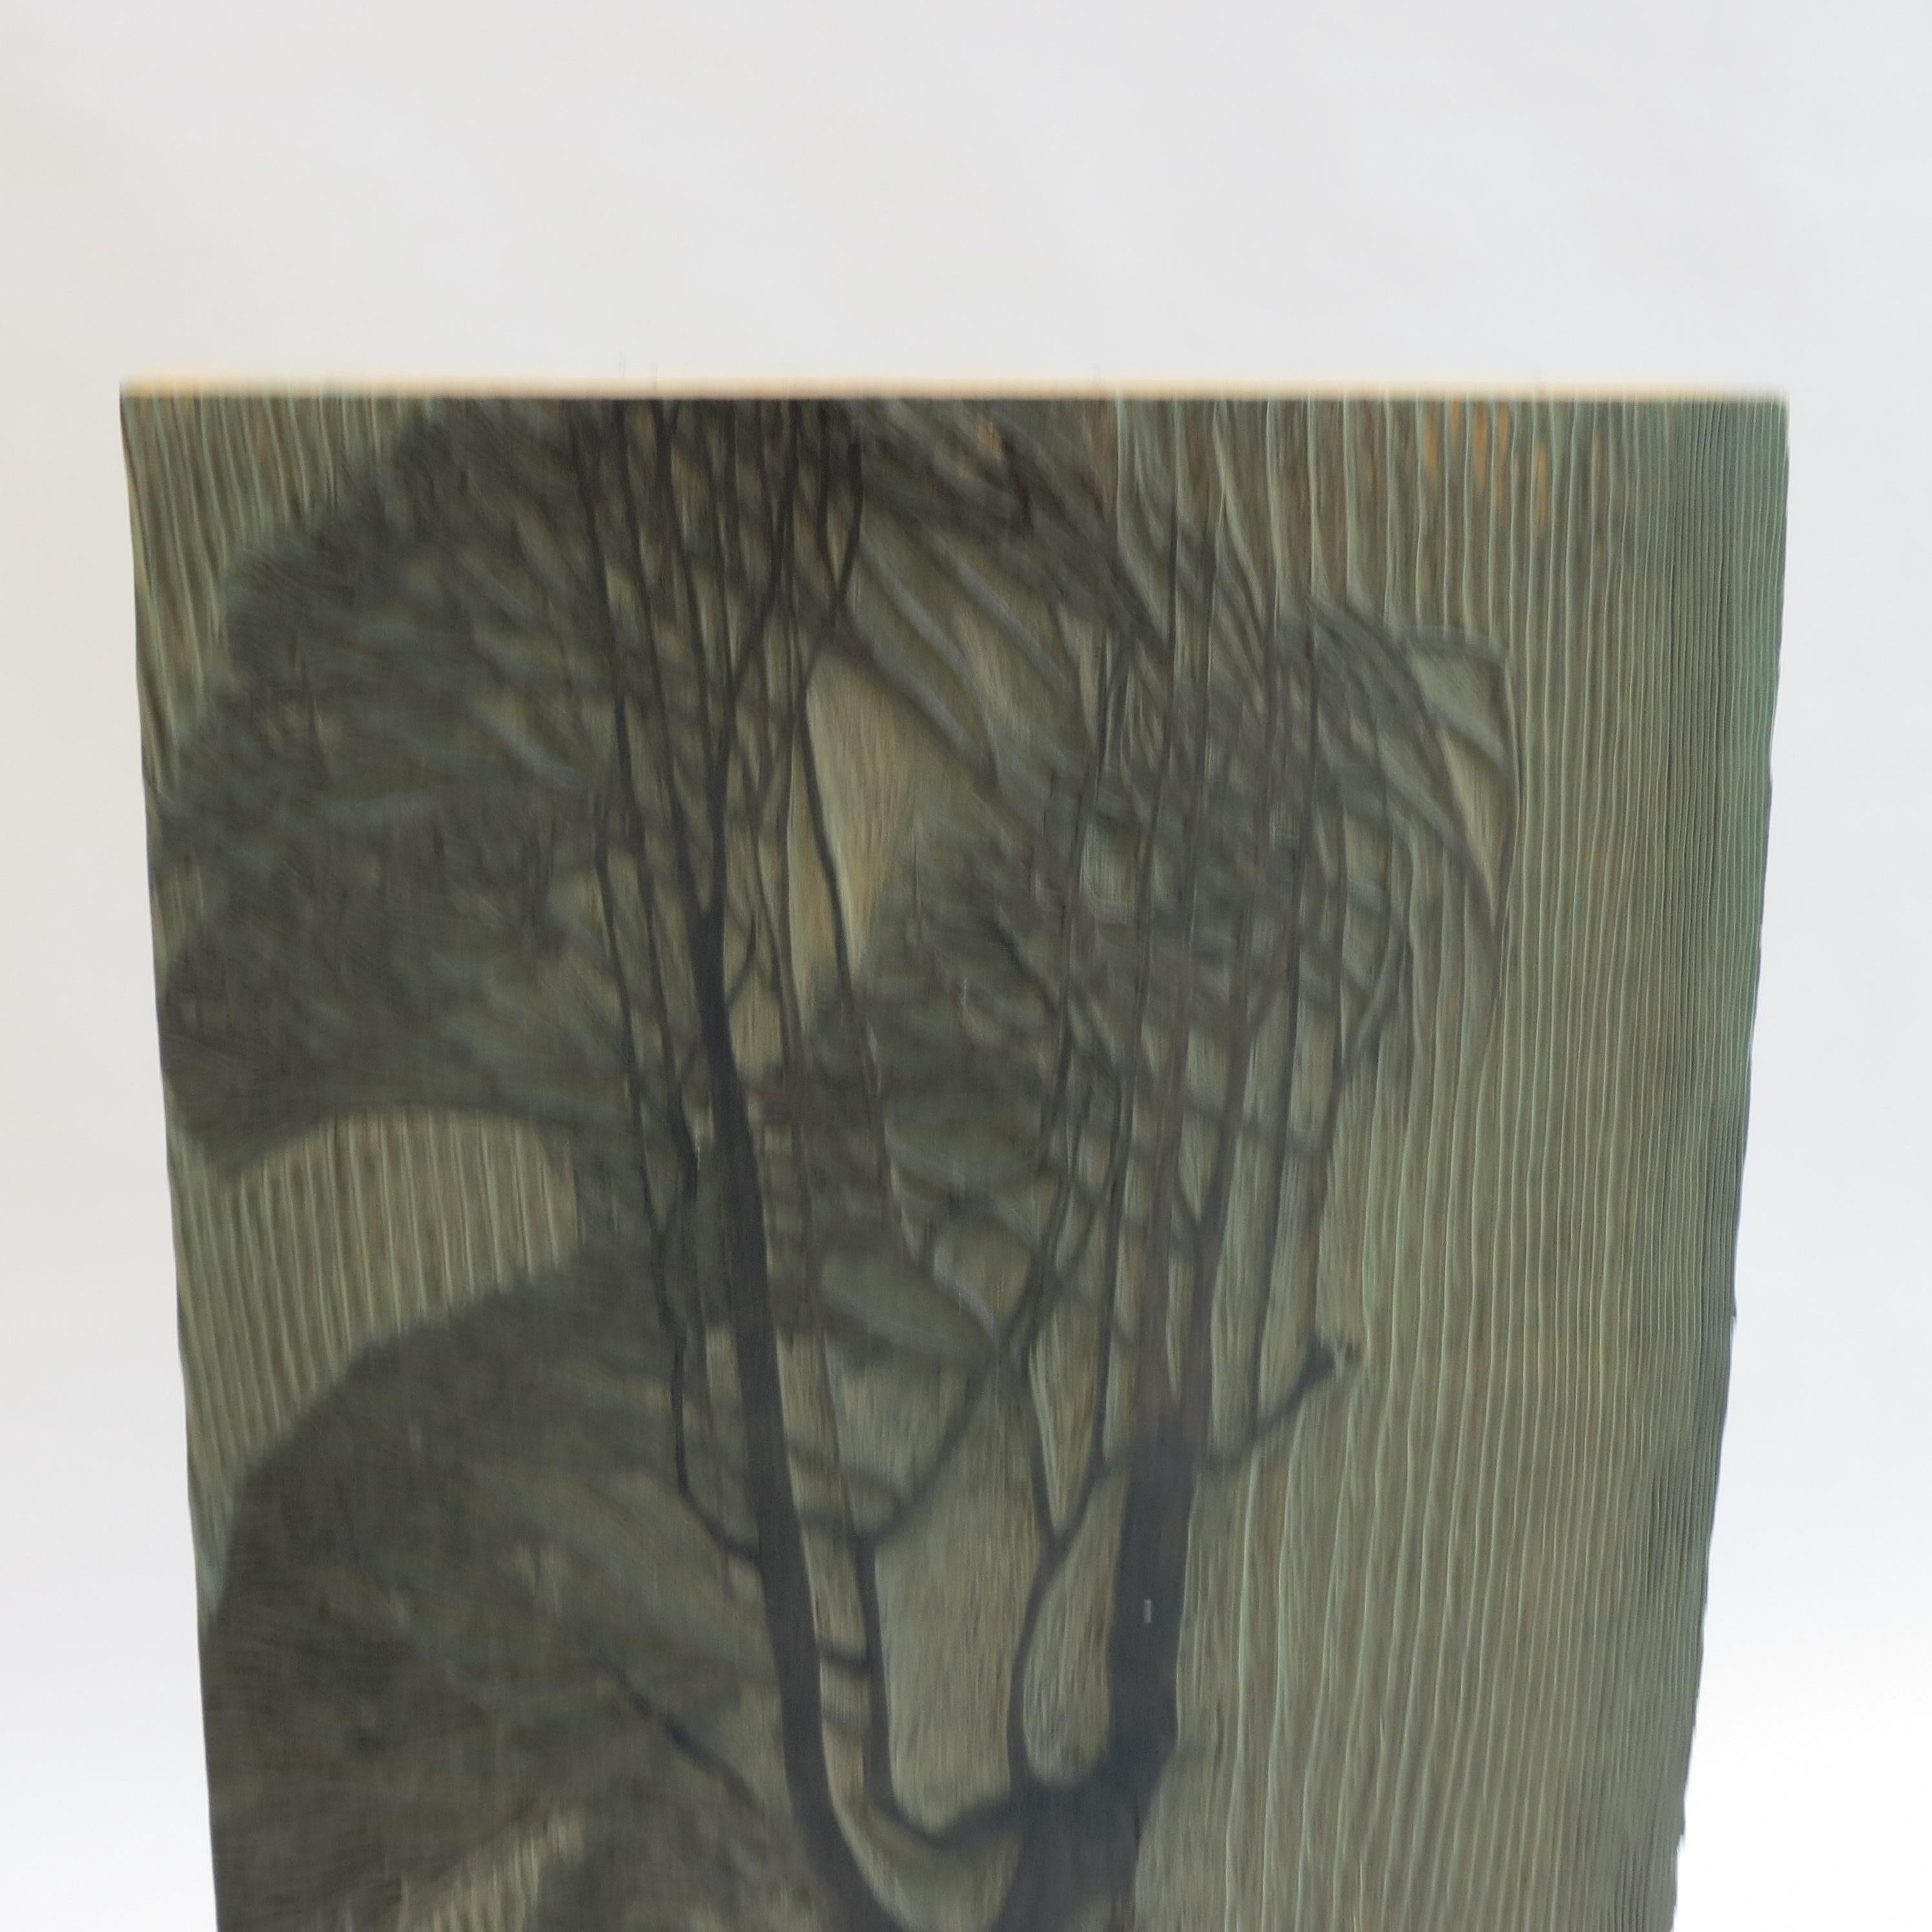 1950s Original Woodcut Carved Wooden Print Block by Pauline Jacobsen Tree For Sale 1